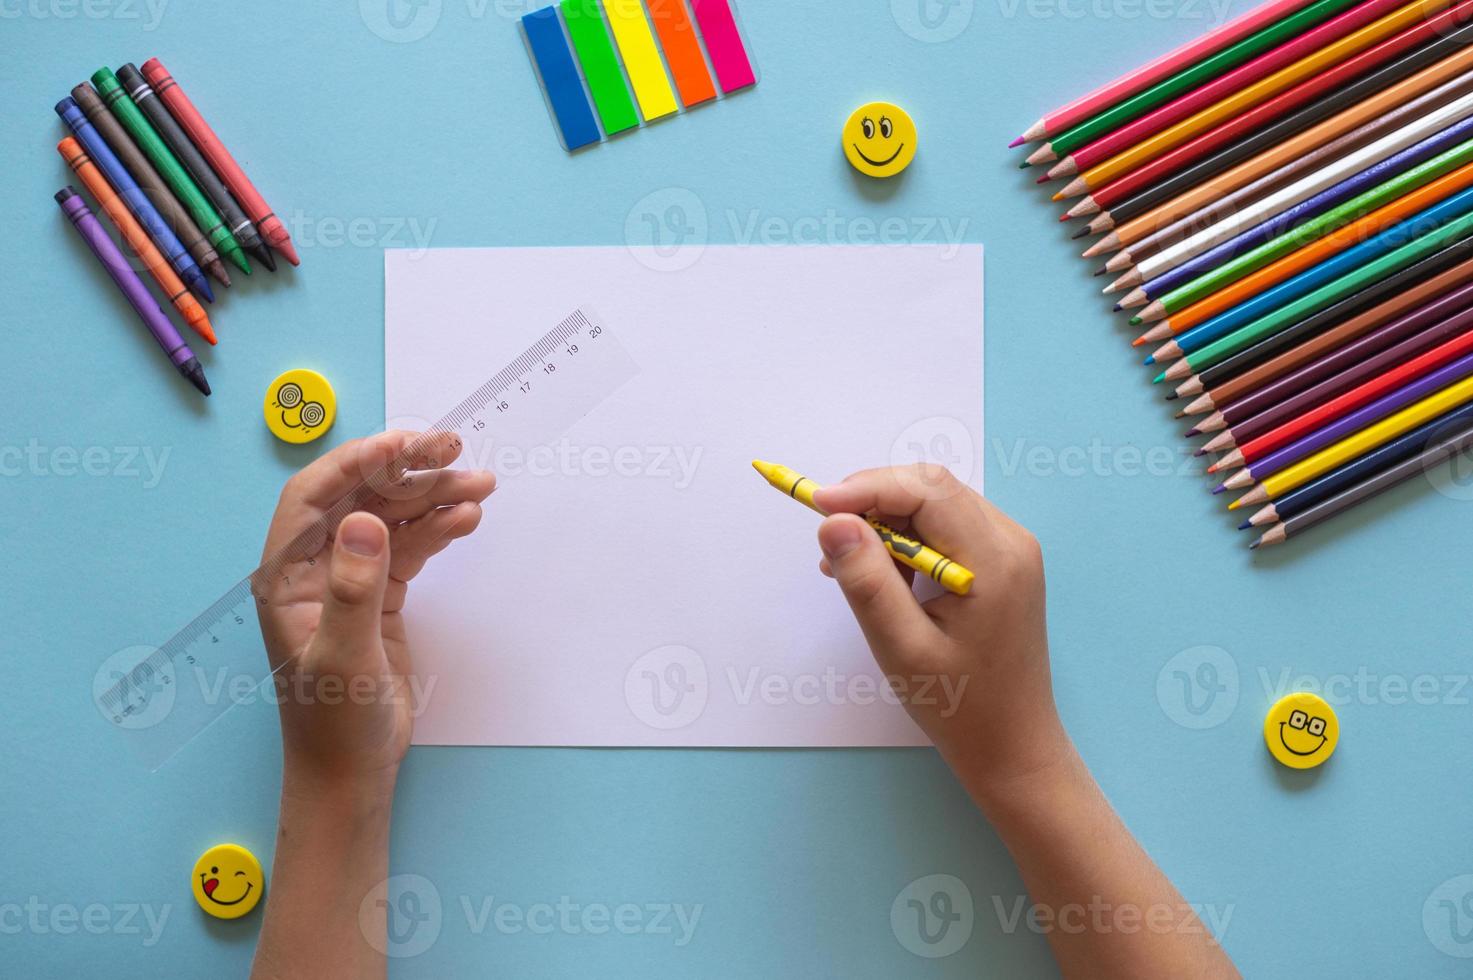 A set of bright stationery on a blue background. Hands holding a ruler photo